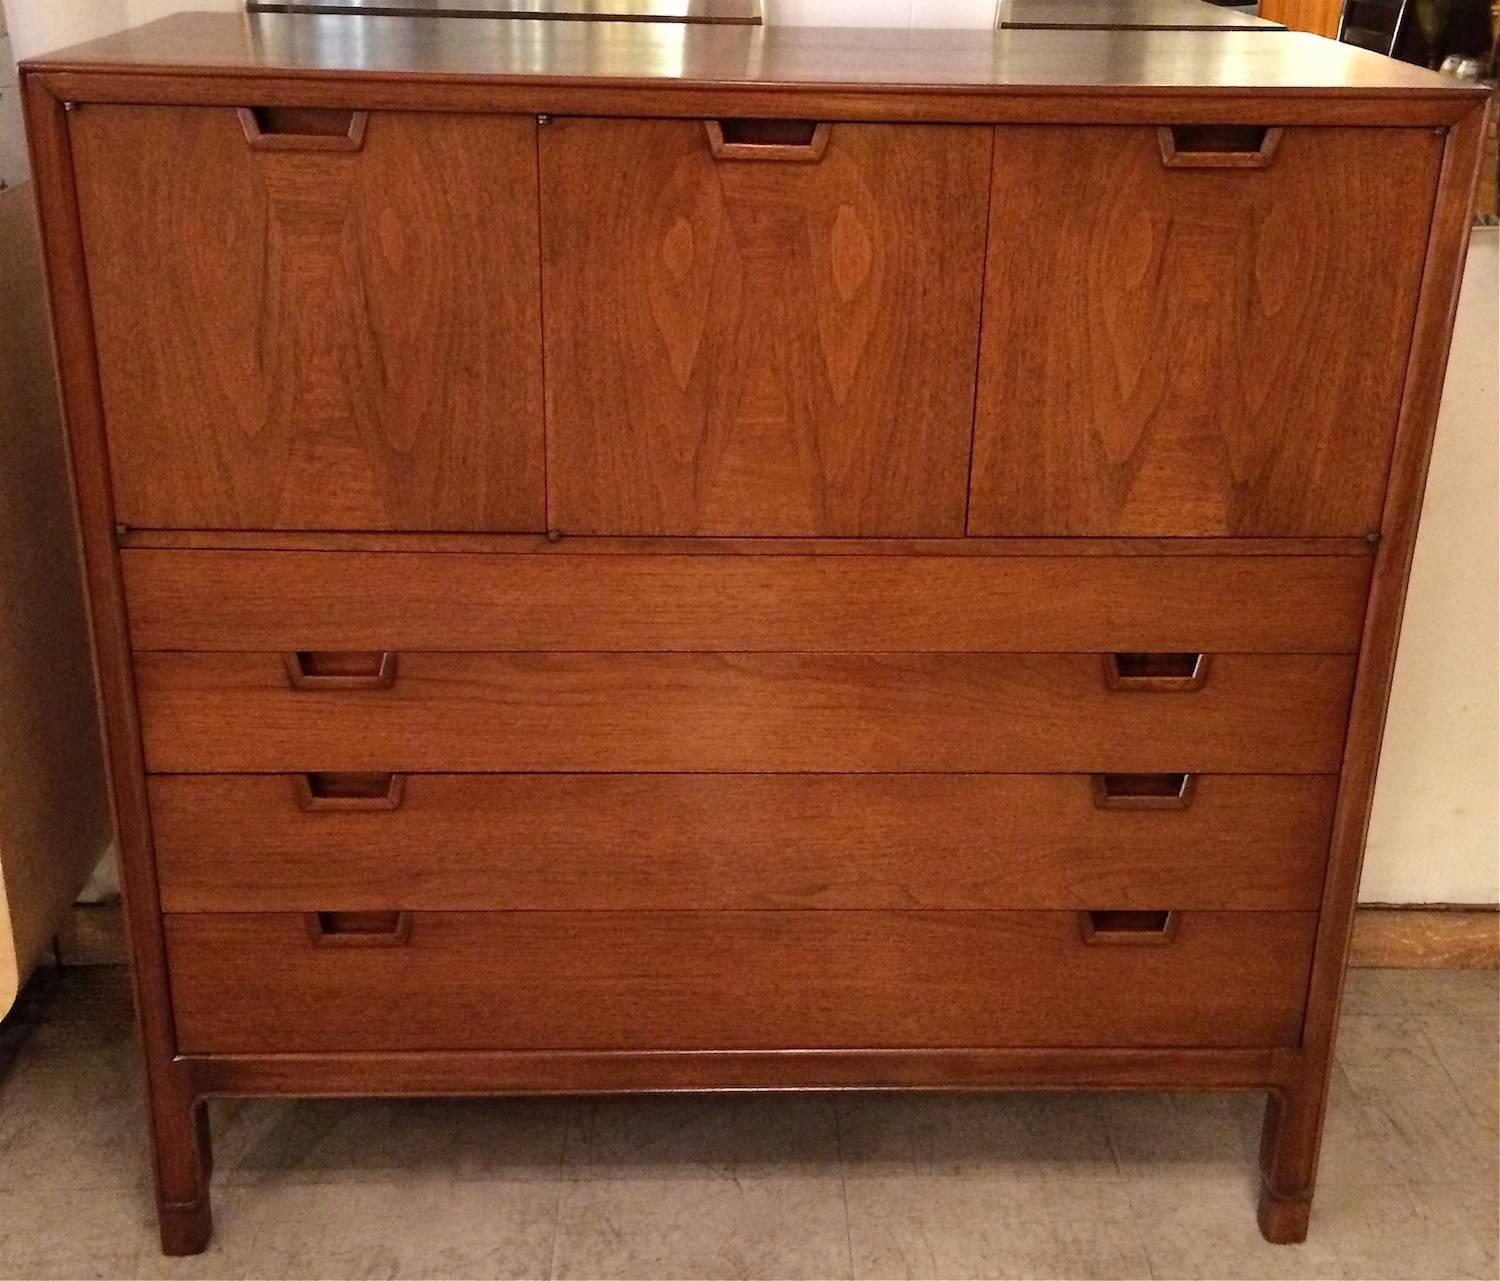 Mid-Century Modern, walnut, highboy dresser or gentleman's chest by John Stuart for Janus Collection with compartments on top and four drawers on the bottom. Fine details throughout featuring recessed pulls and inlaid details on the top doors.